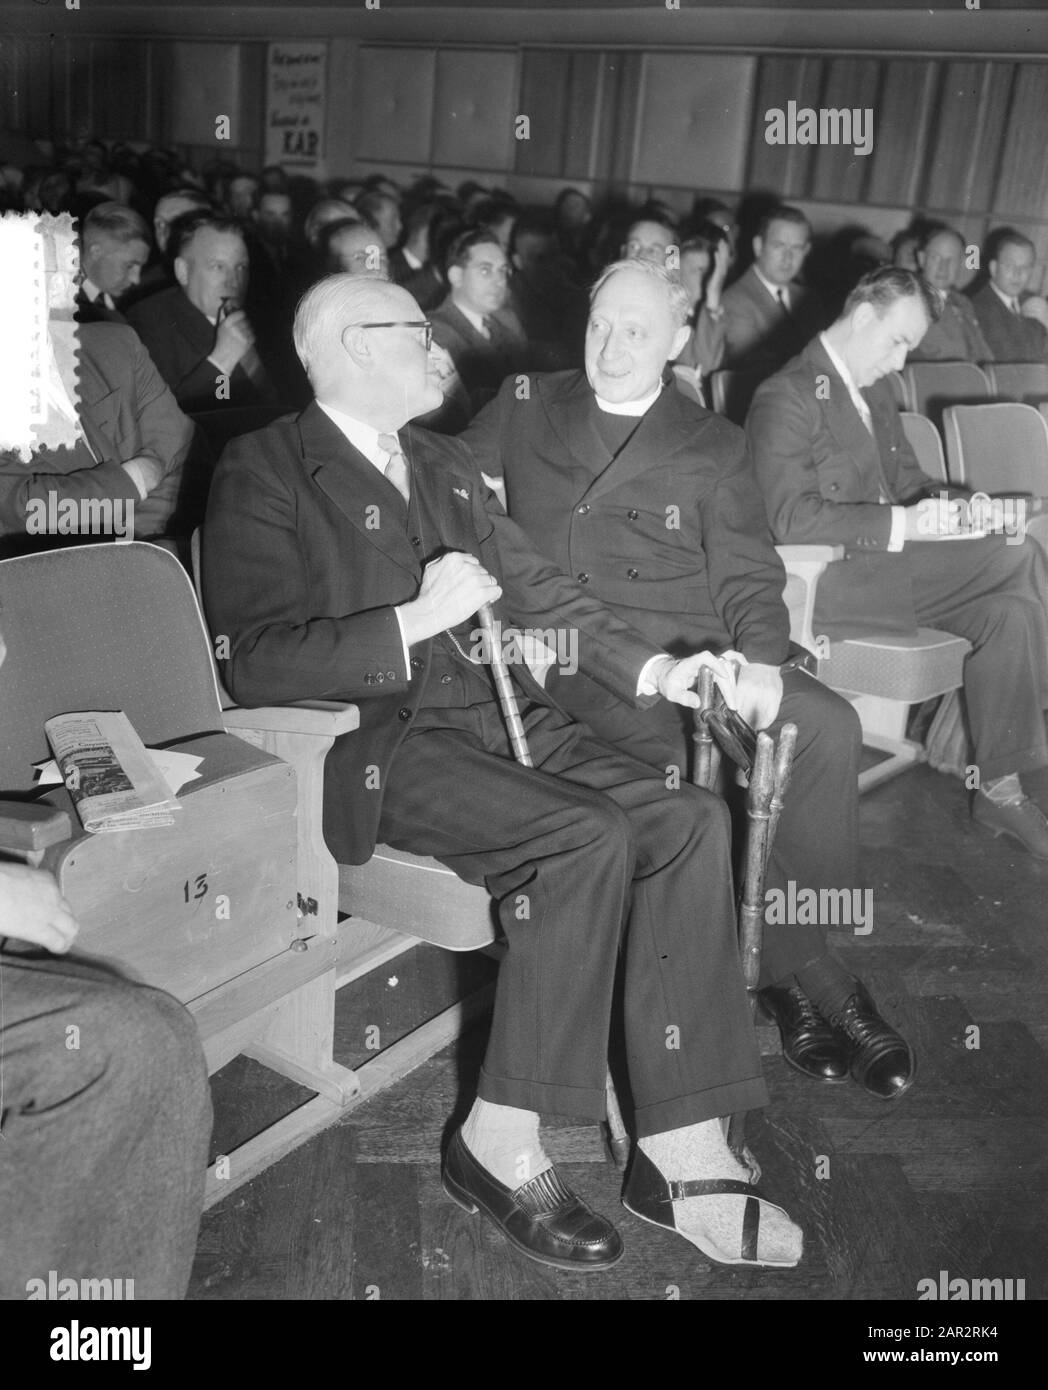 Wages congress of the Catholic Workers Movement (KAB) in Utrecht in building K & W. The chairman of the KVP Group, Prof. mr. C.P.M. Romom with injured foot belonged to the guests. Next to Prof. Romme sits dr. Oilerook Date: 13 October 1953 Location: Utrecht Keywords: congresses, trade unions Personal name: Kab, Romme Stock Photo